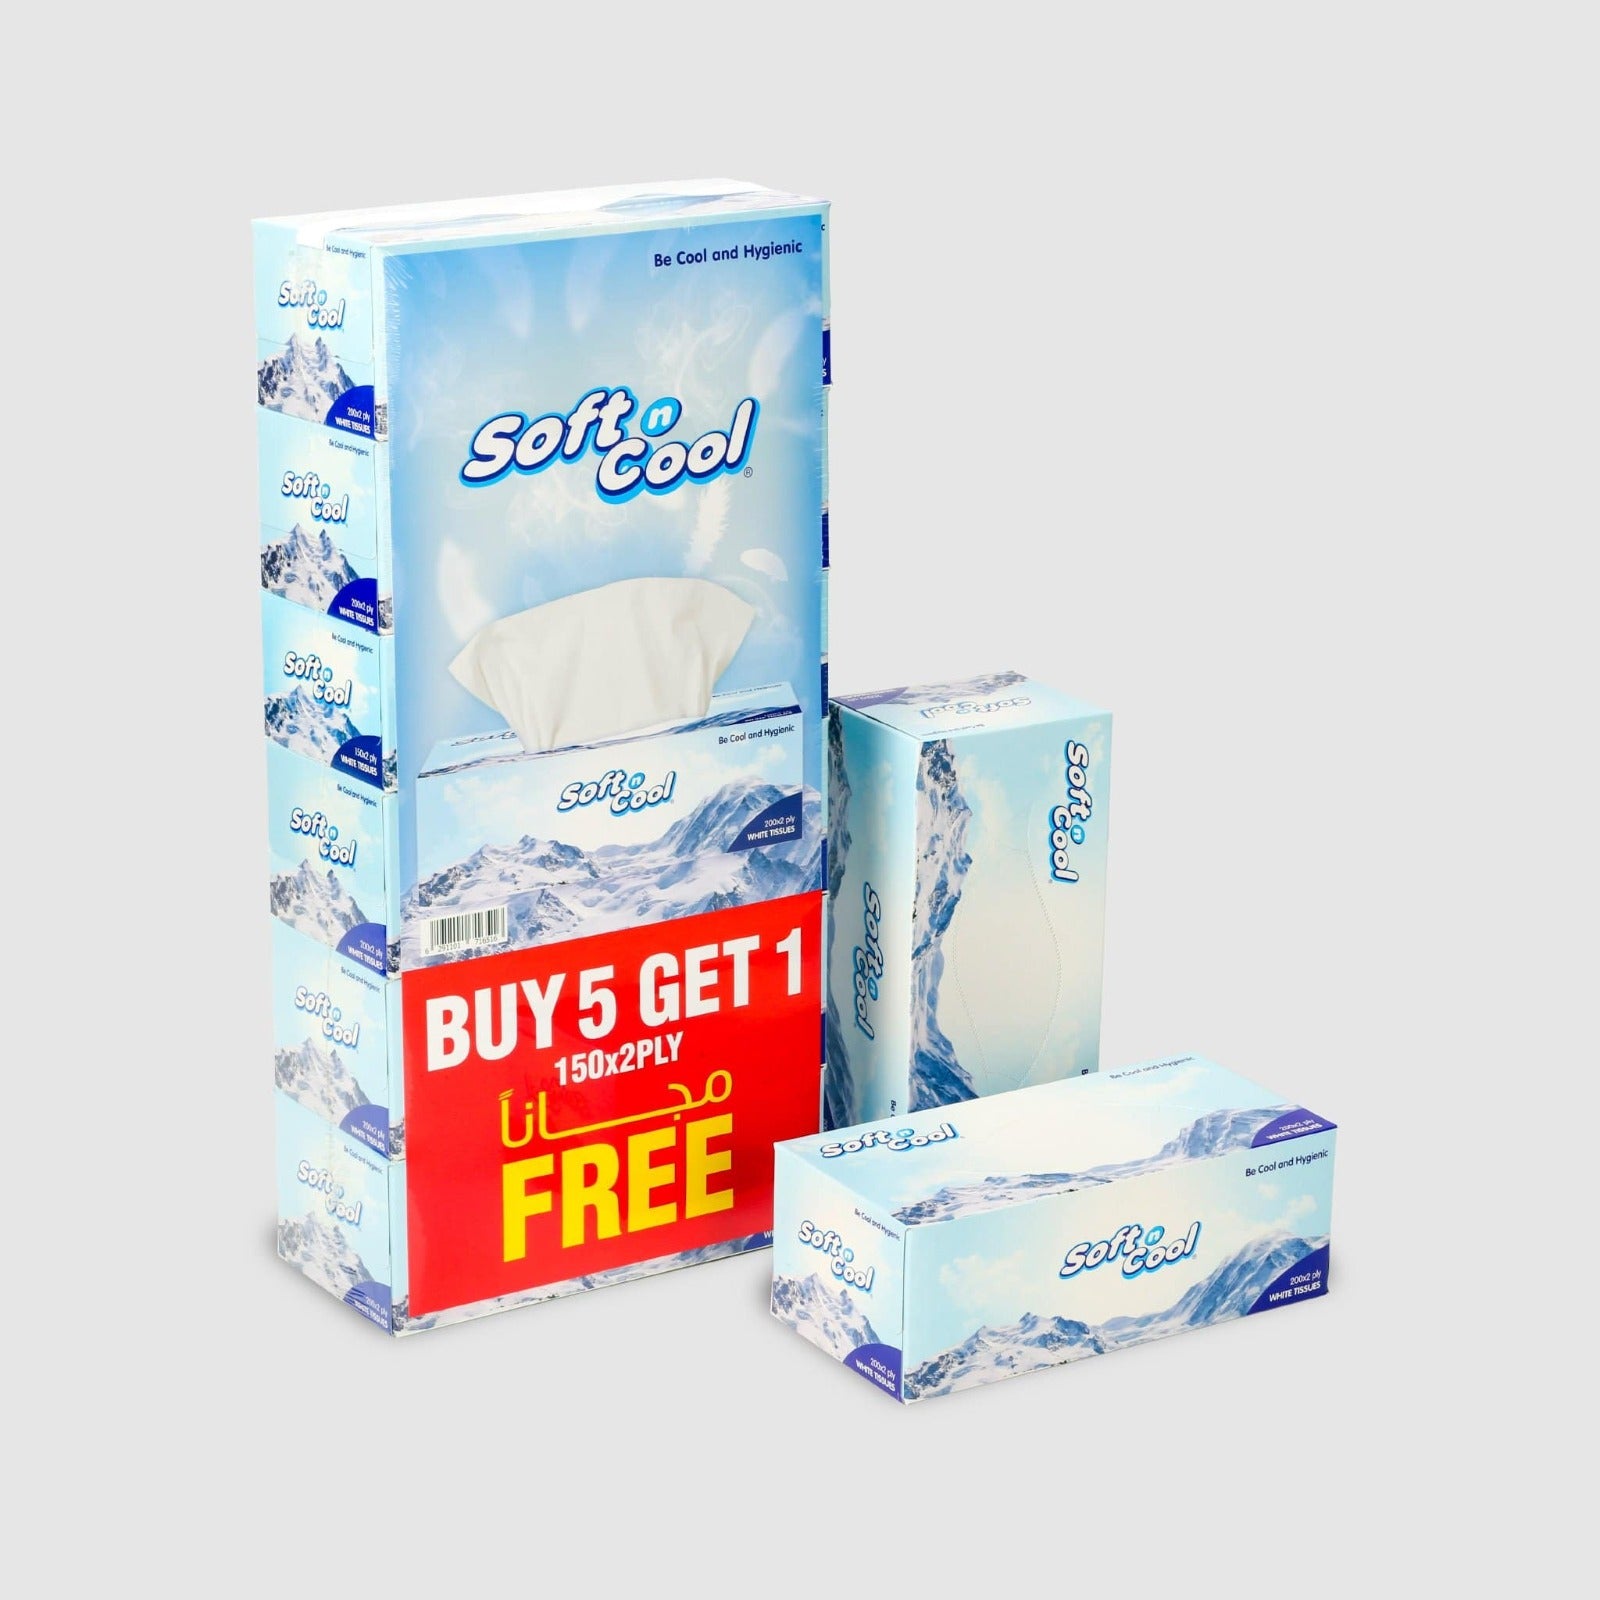 Soft N Cool Facial Tissue 200 Pulls X 2 Ply 30 Boxes + 150 Pull X 2 Ply 6 Box